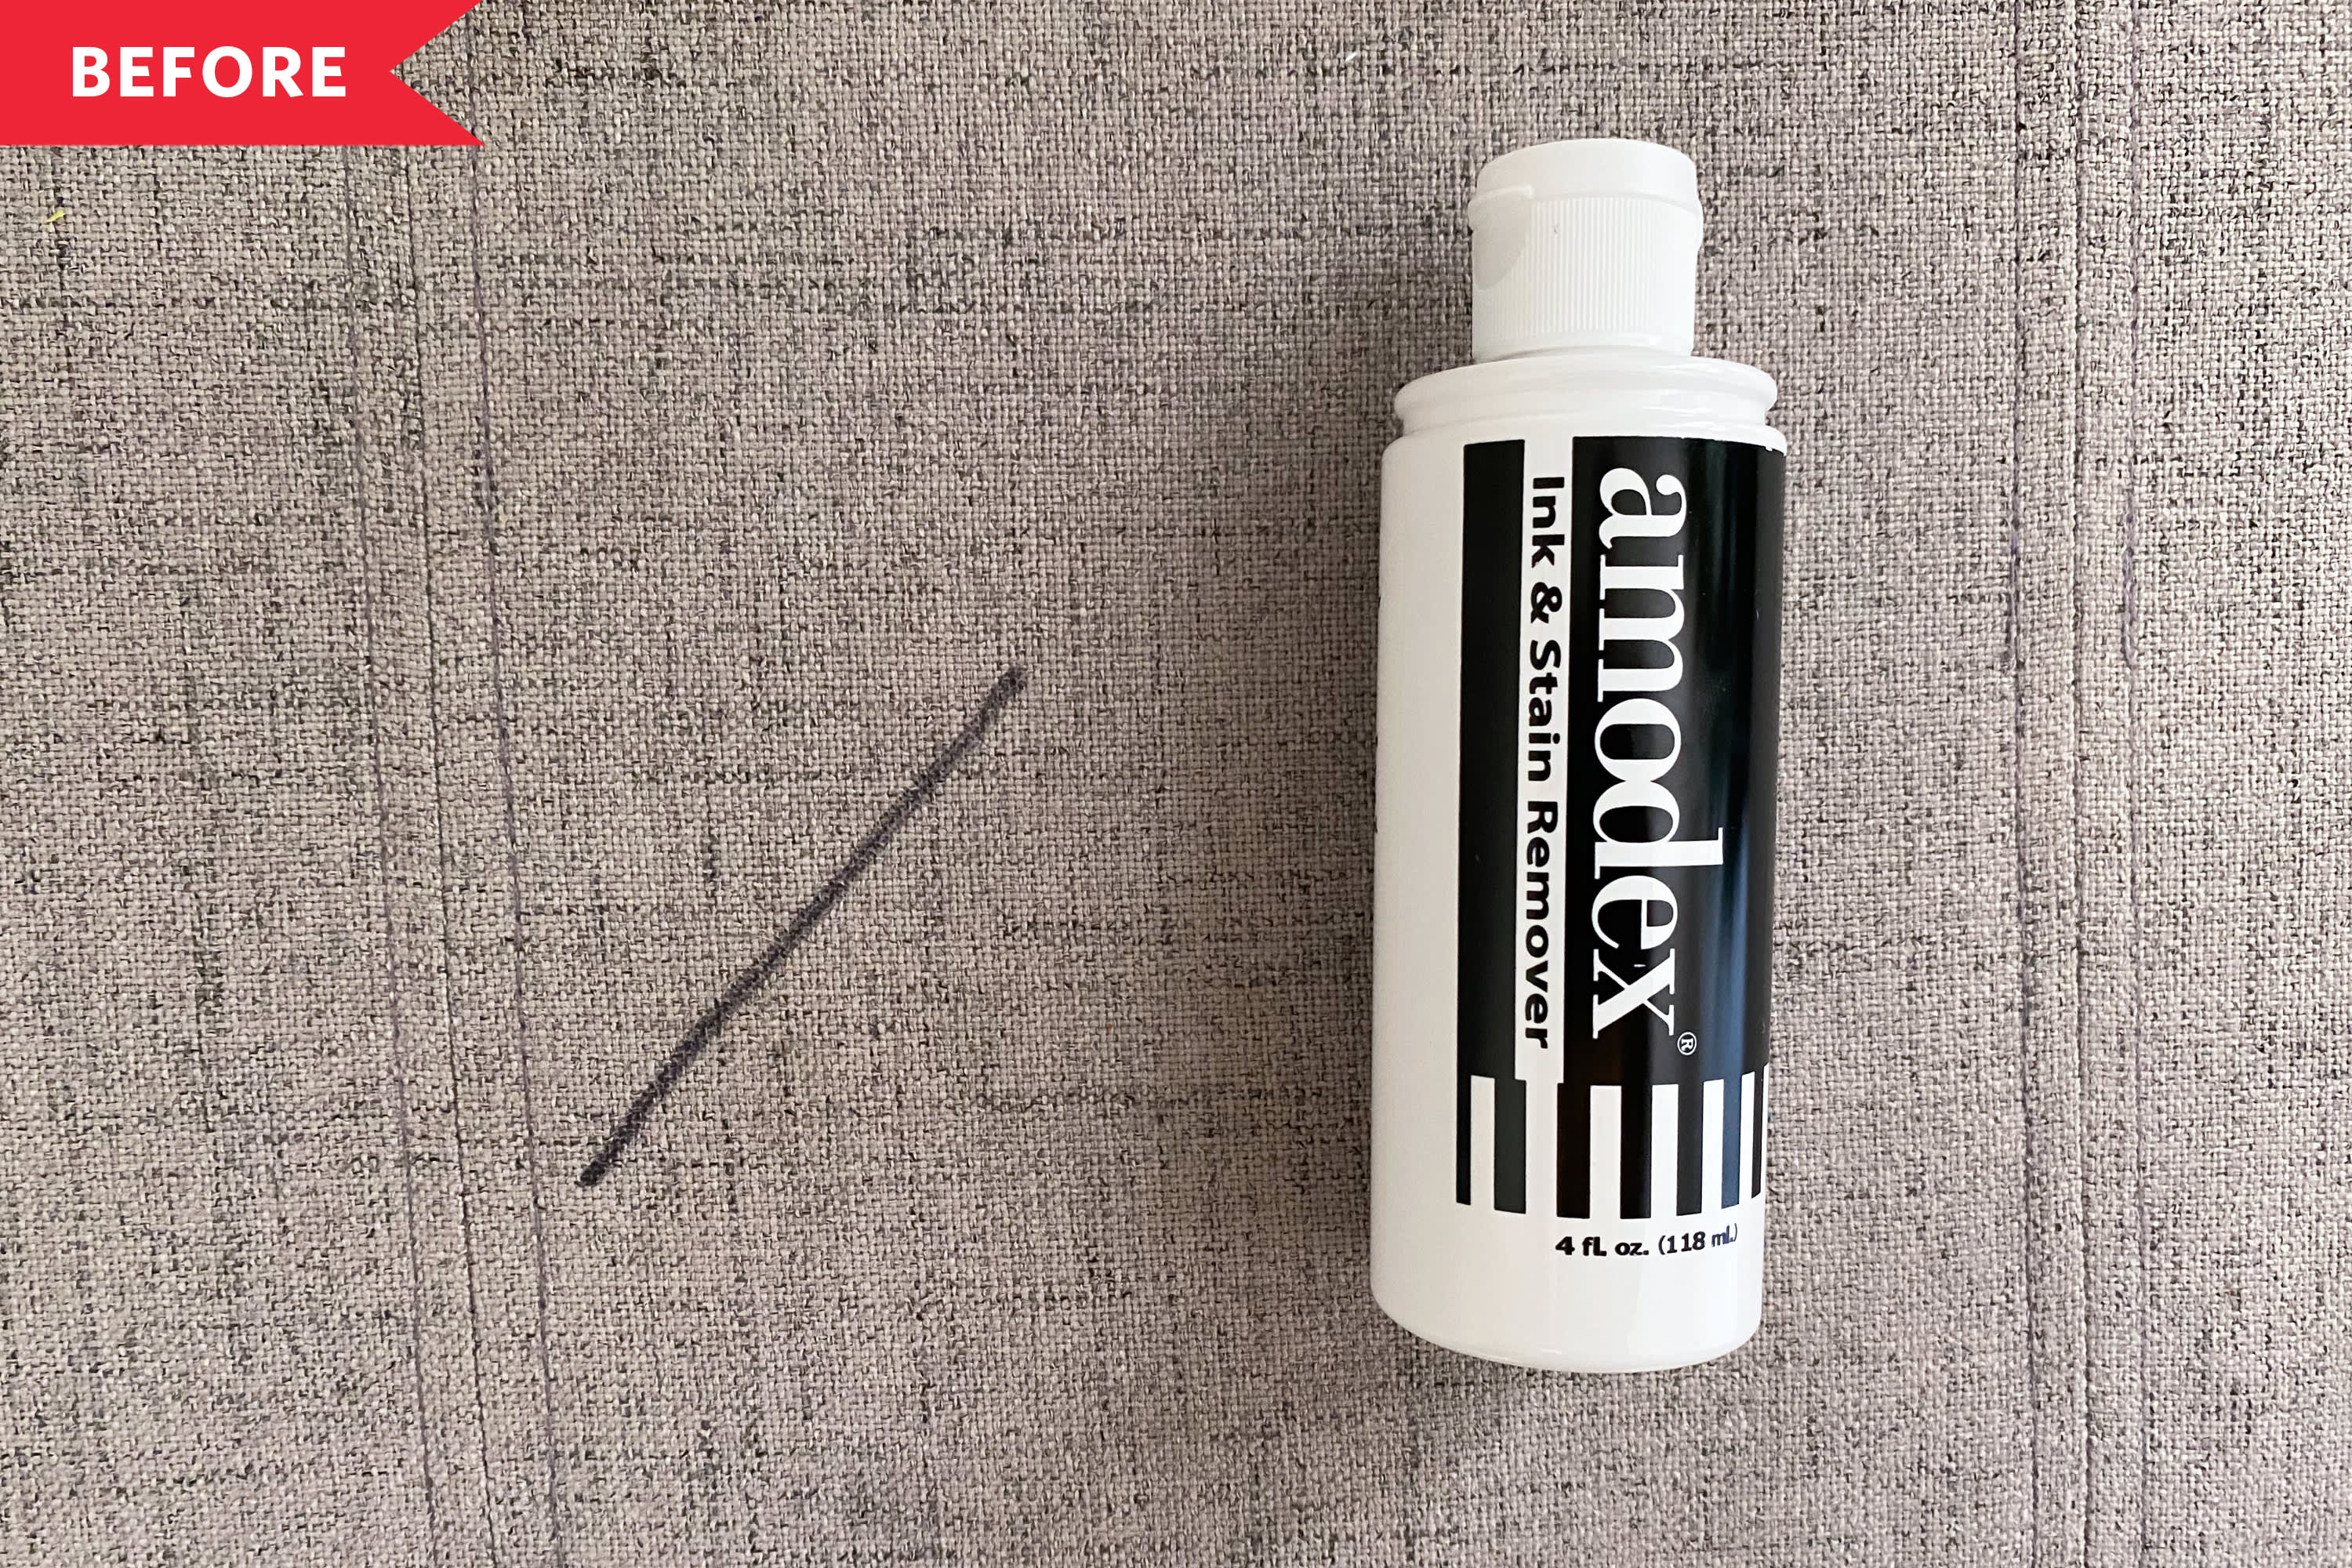 Built from Ink and Tea: An Unexpected Review of Amodex Ink and Stain Remover